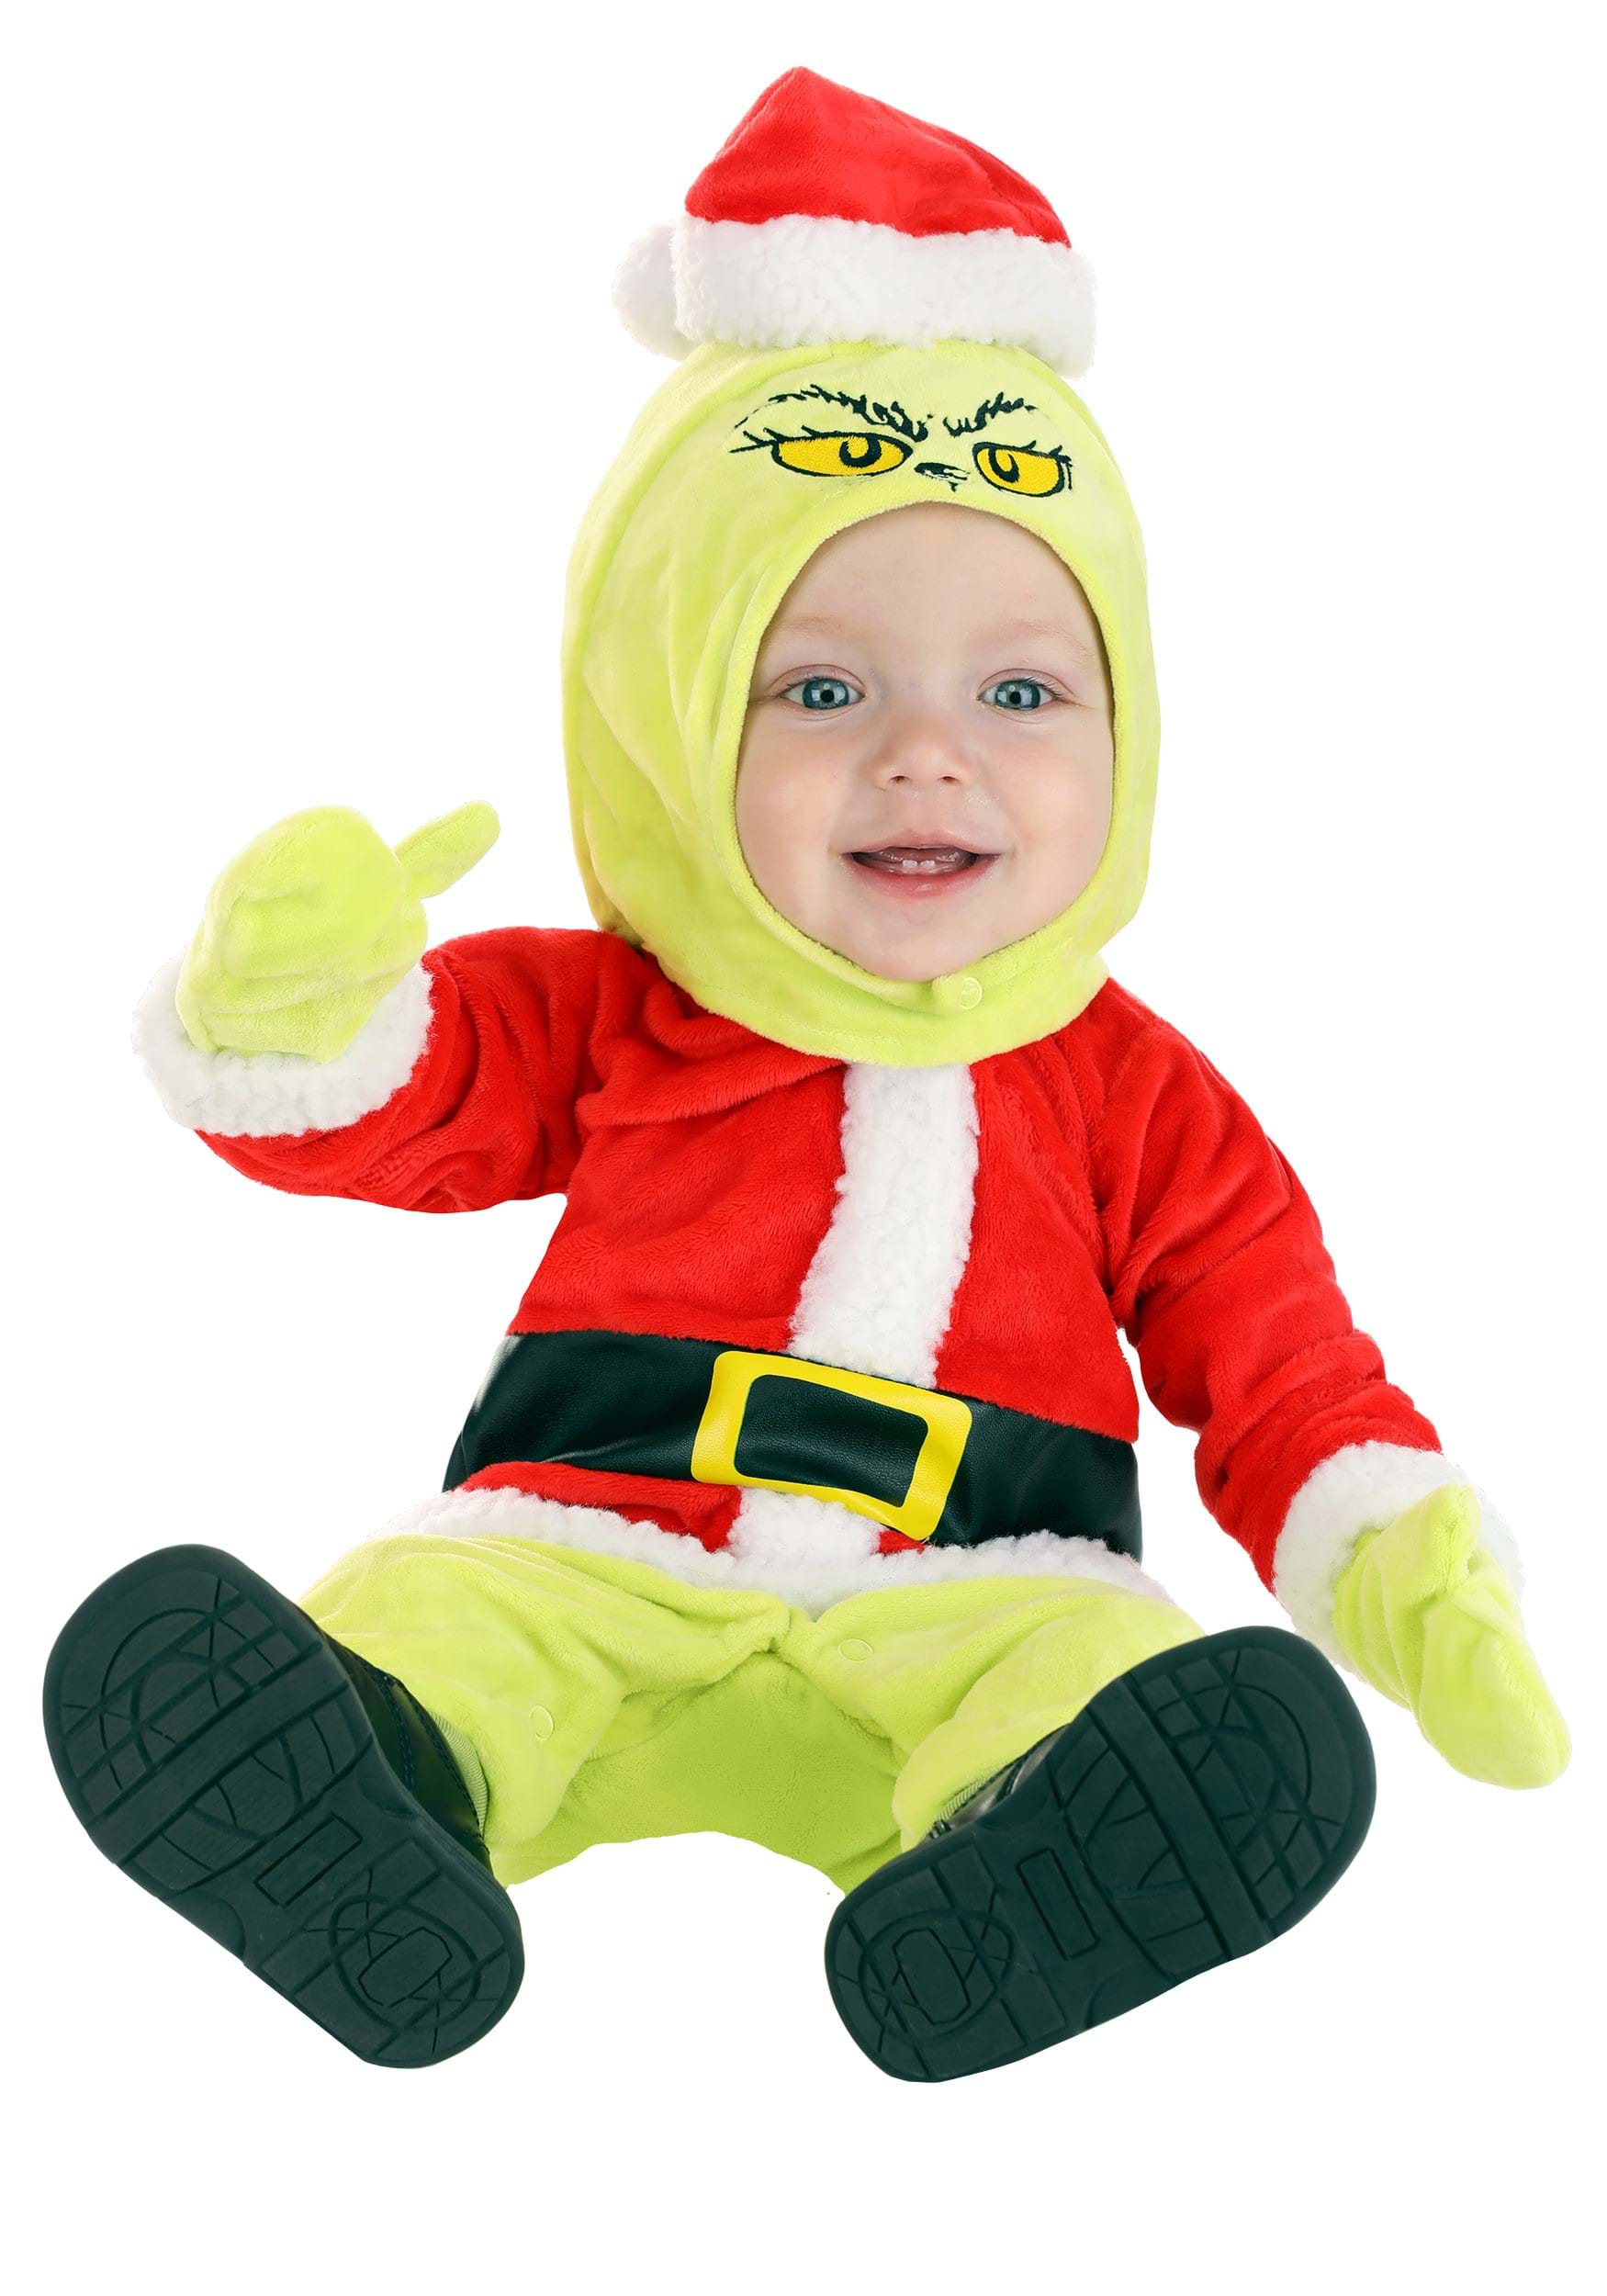 Photos - Fancy Dress SanTa FUN Costumes The Grinch Infant  Costume Black/Green/Red 